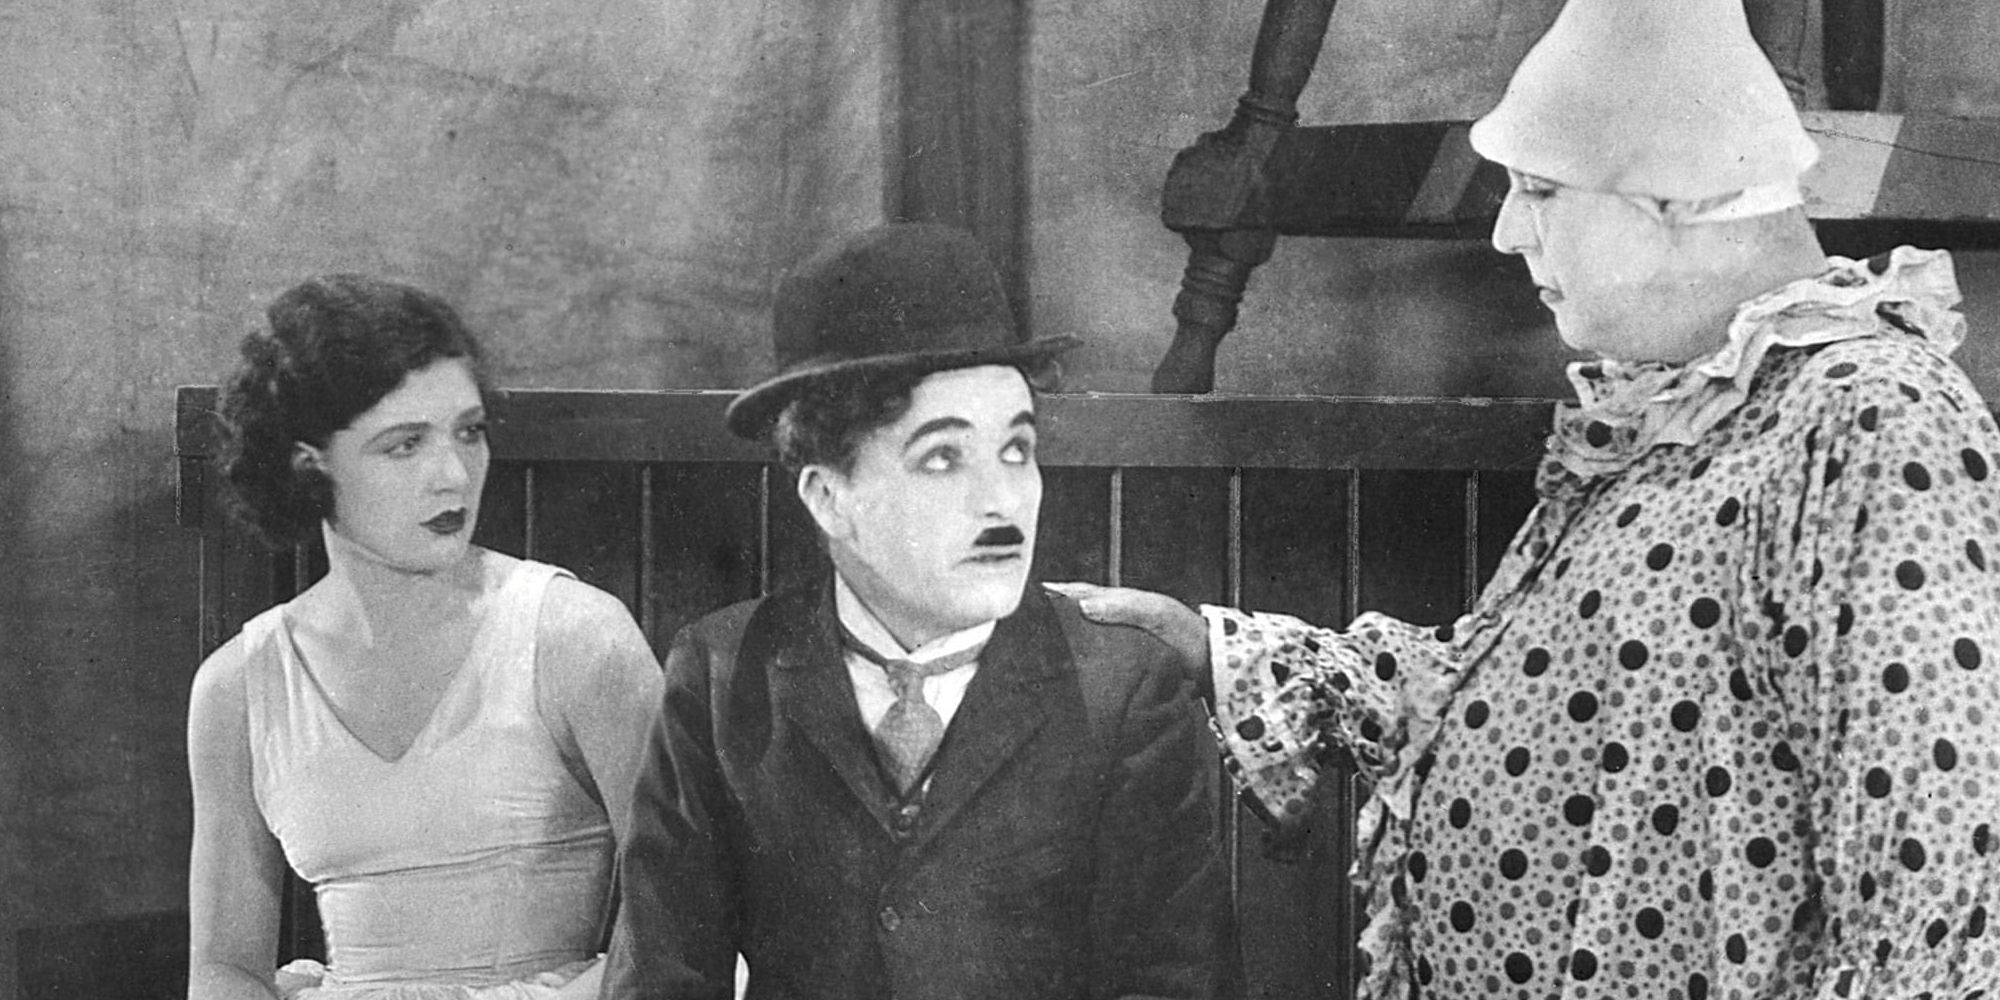 the tramp, his beloved, and a clown in Charles Chaplin's film "The Circus"